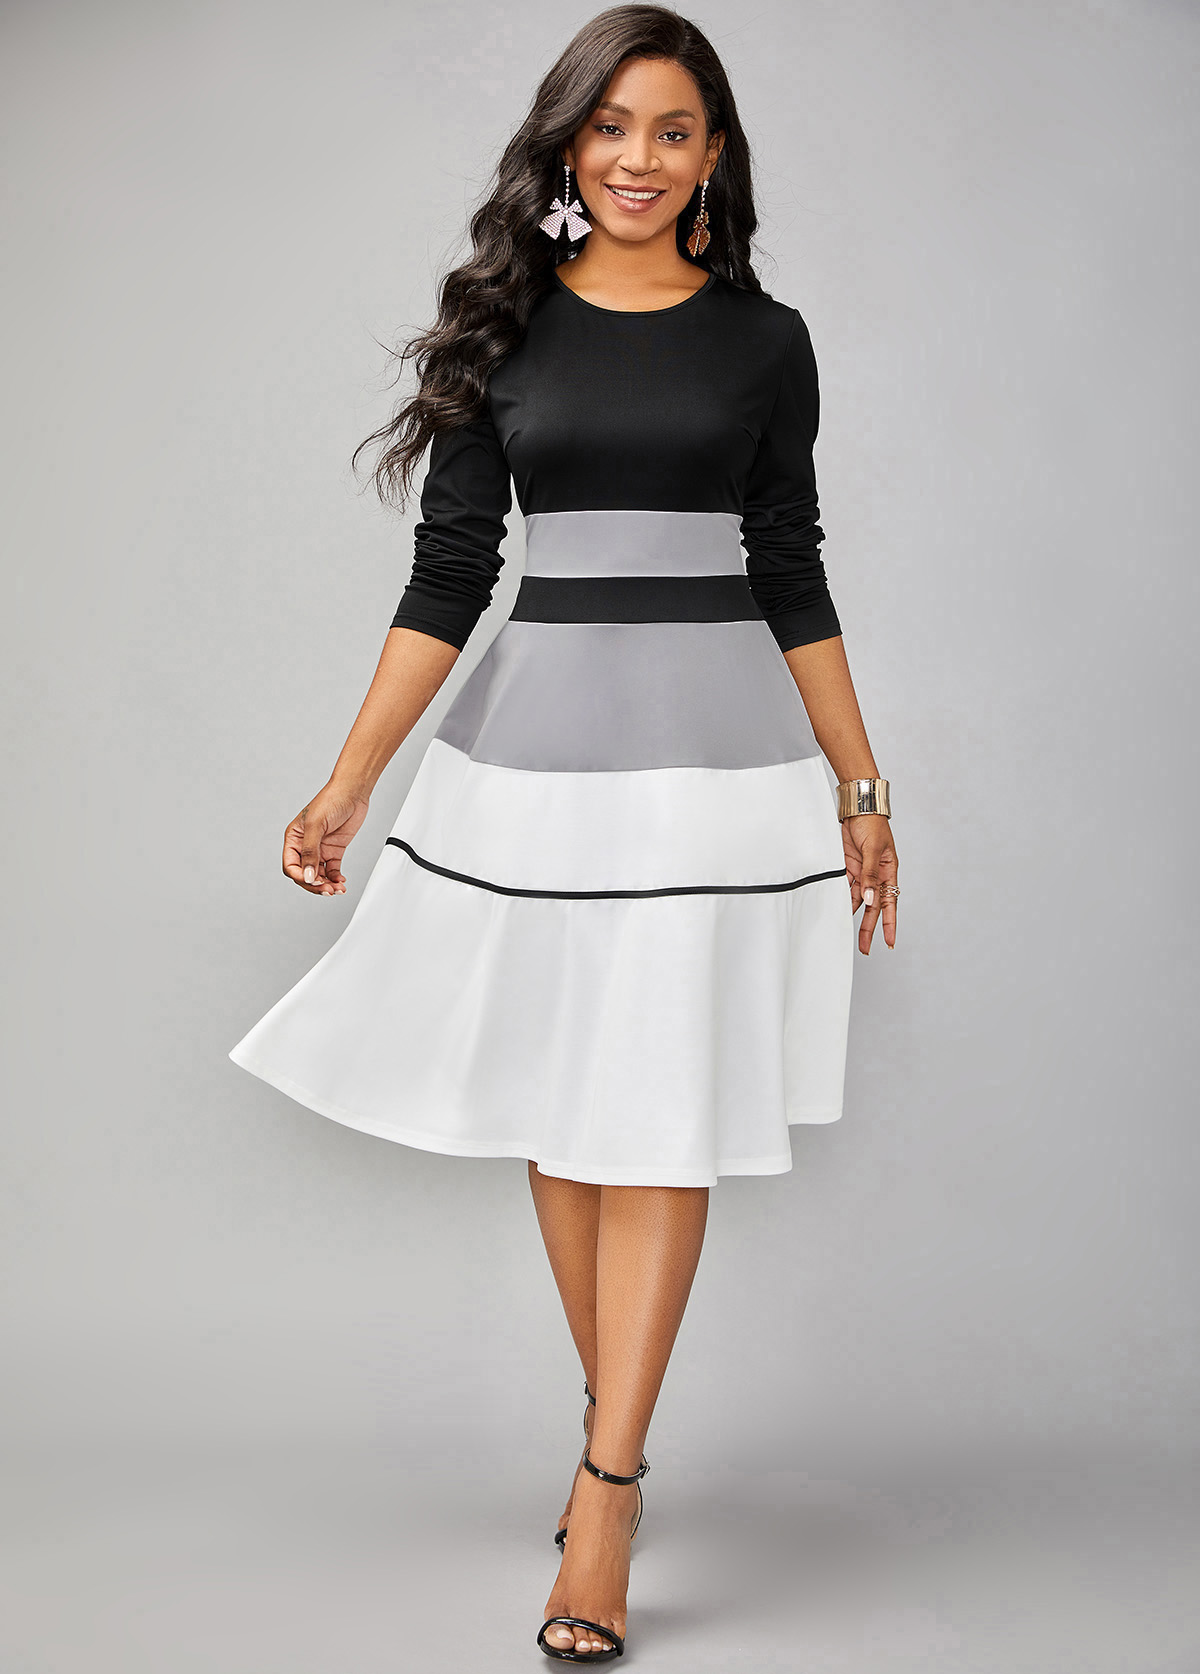 Long Sleeve Contrast Round Neck Striped Dress